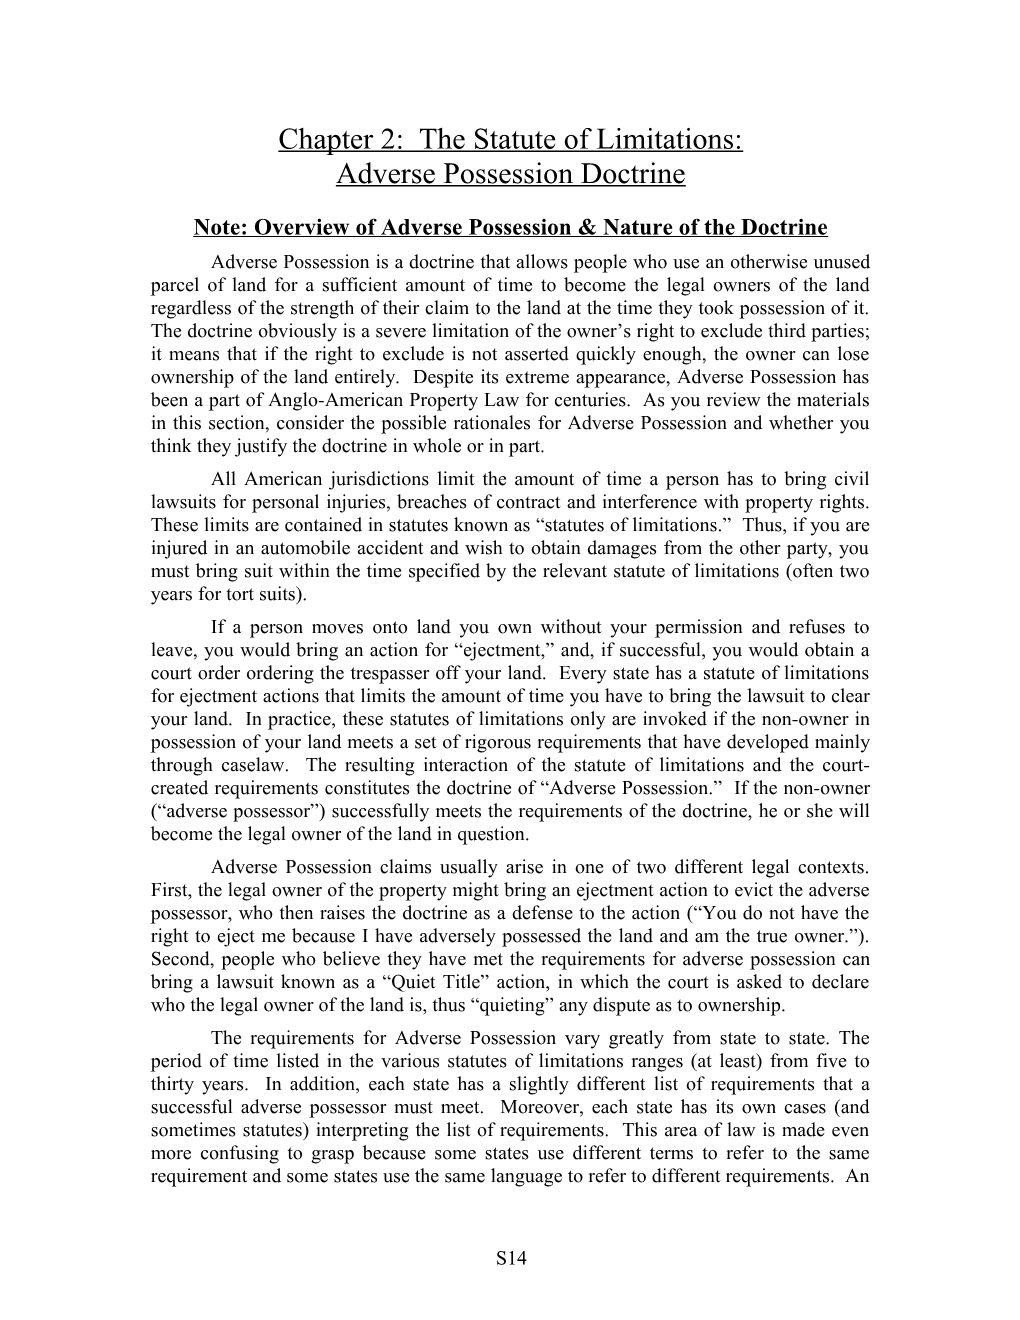 Note: Overview of Adverse Possession & Nature of the Doctrine